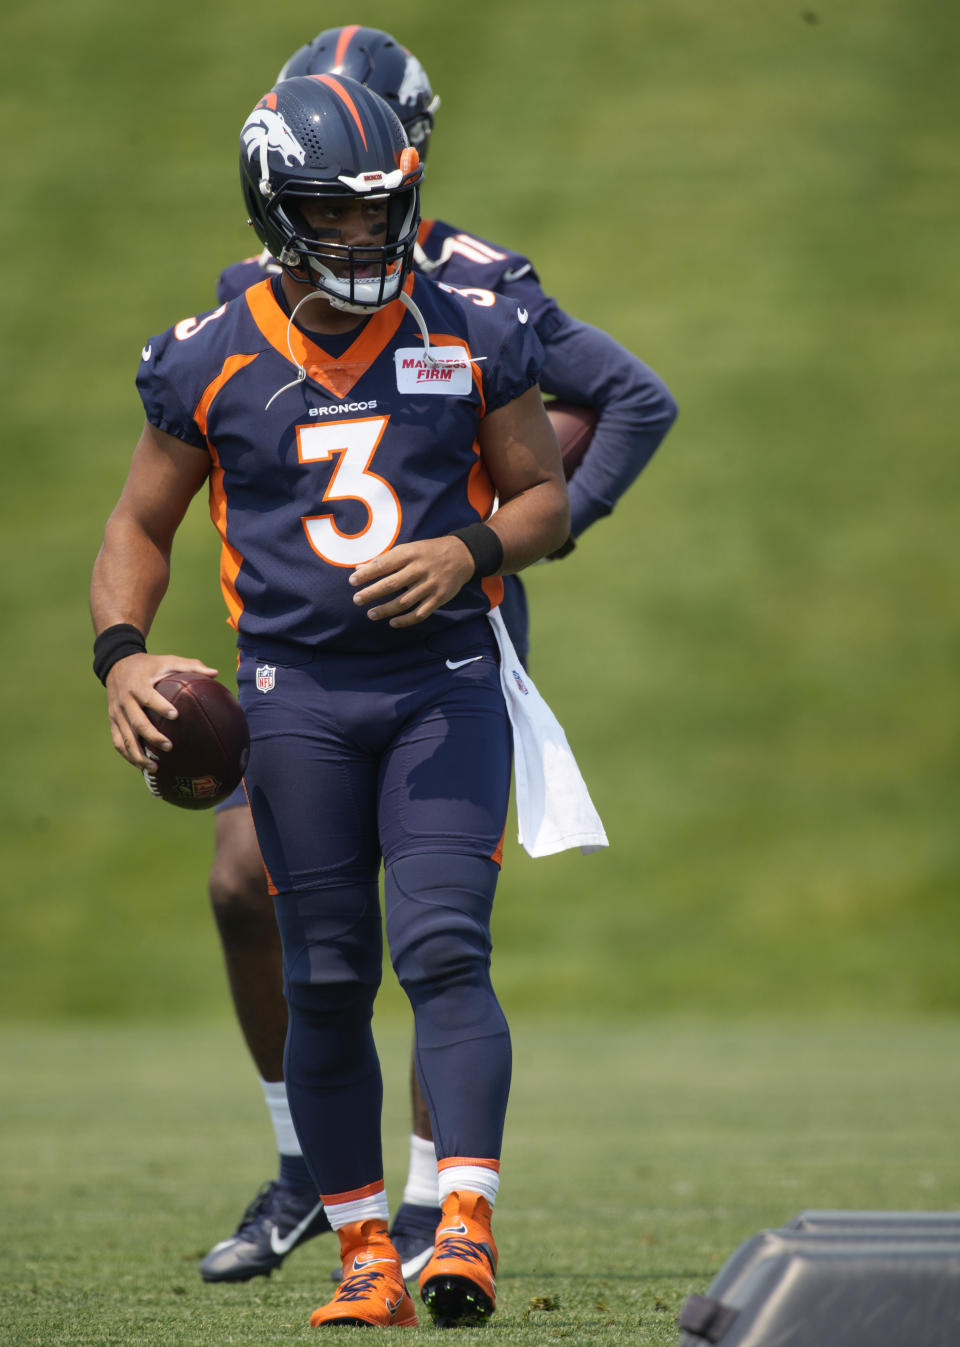 Denver Broncos quarterback Russell Wilson takes part in drills during the NFL team's practice at the Broncos' headquarters Monday, June 13, 2022, in Centennial, Colo. (AP Photo/David Zalubowski)